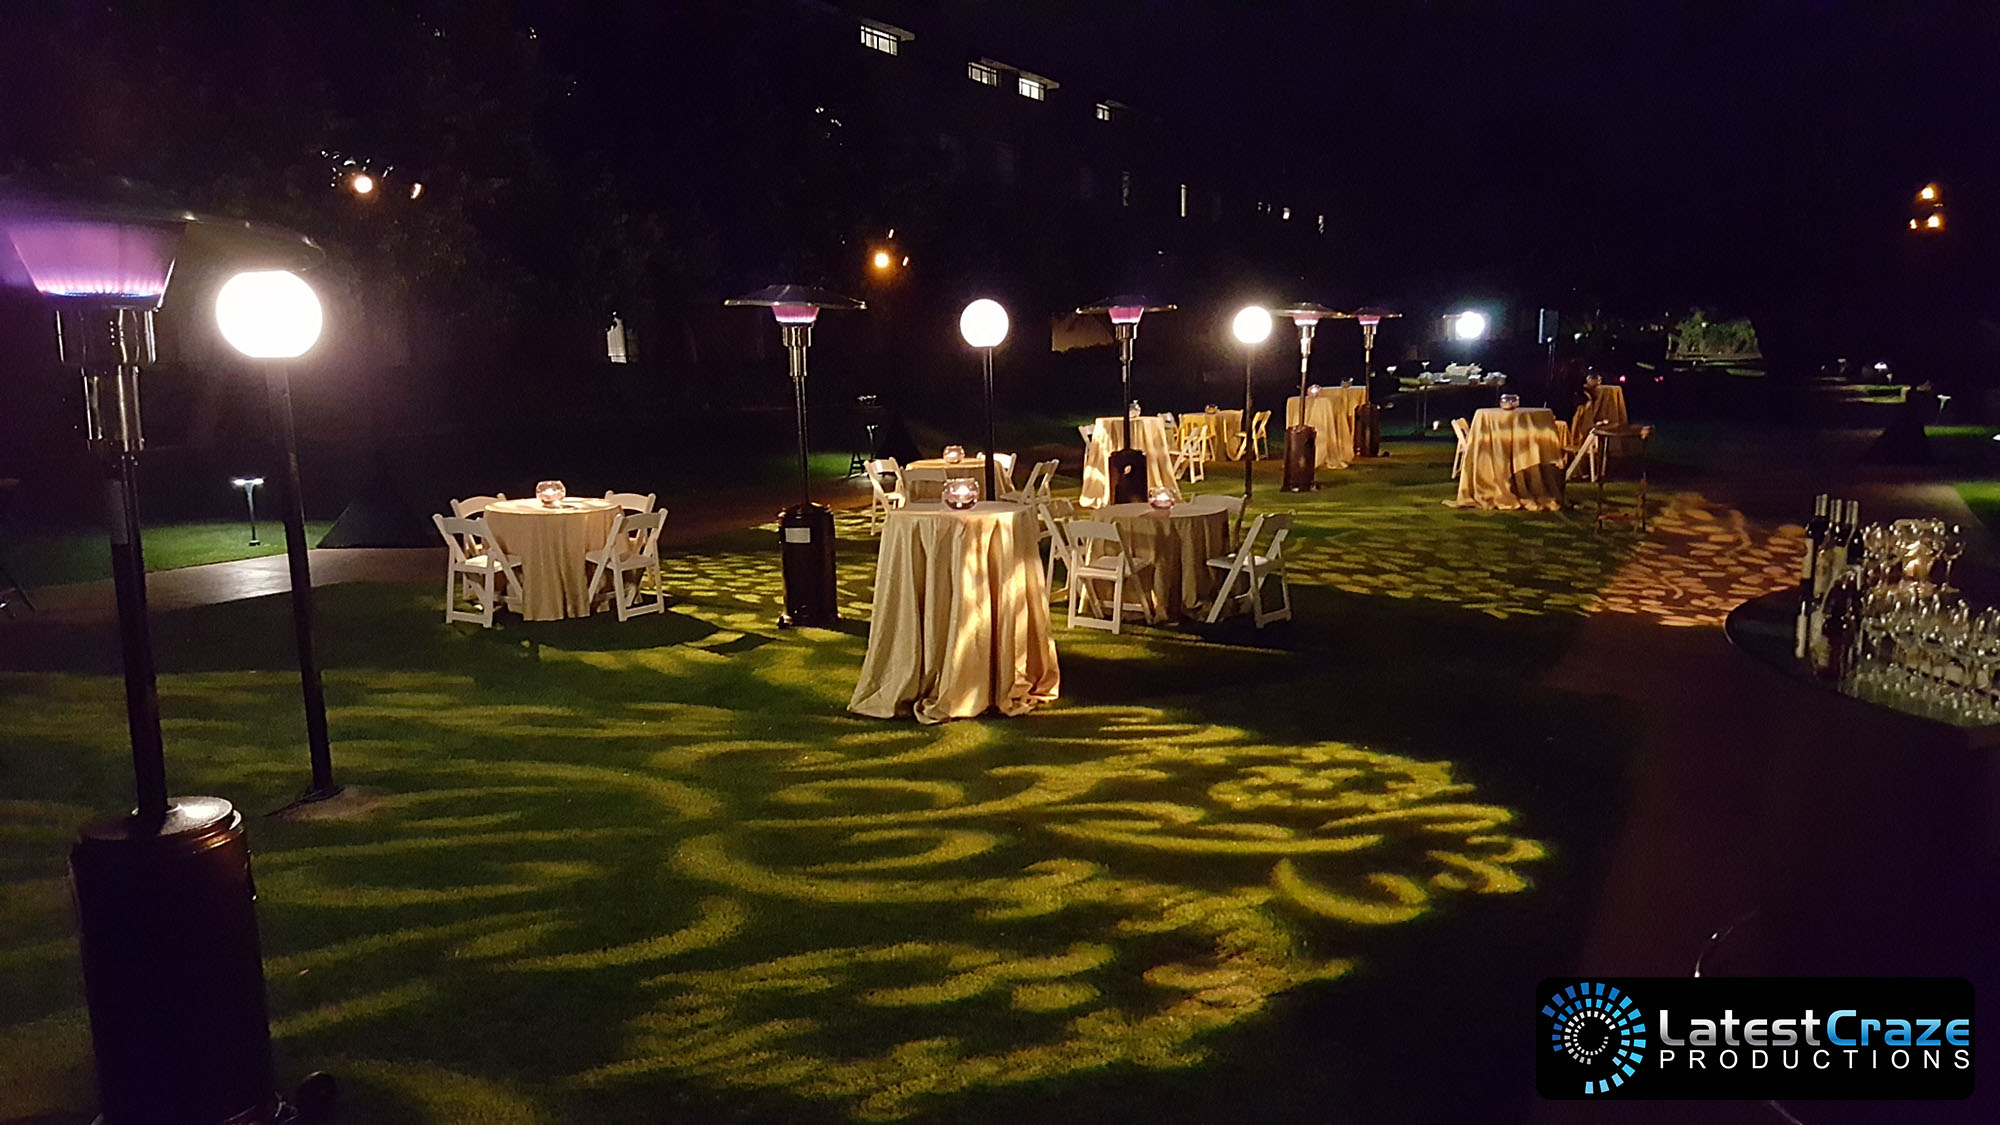 pattern wash gobo outdoor event lighting Latest Craze Productions